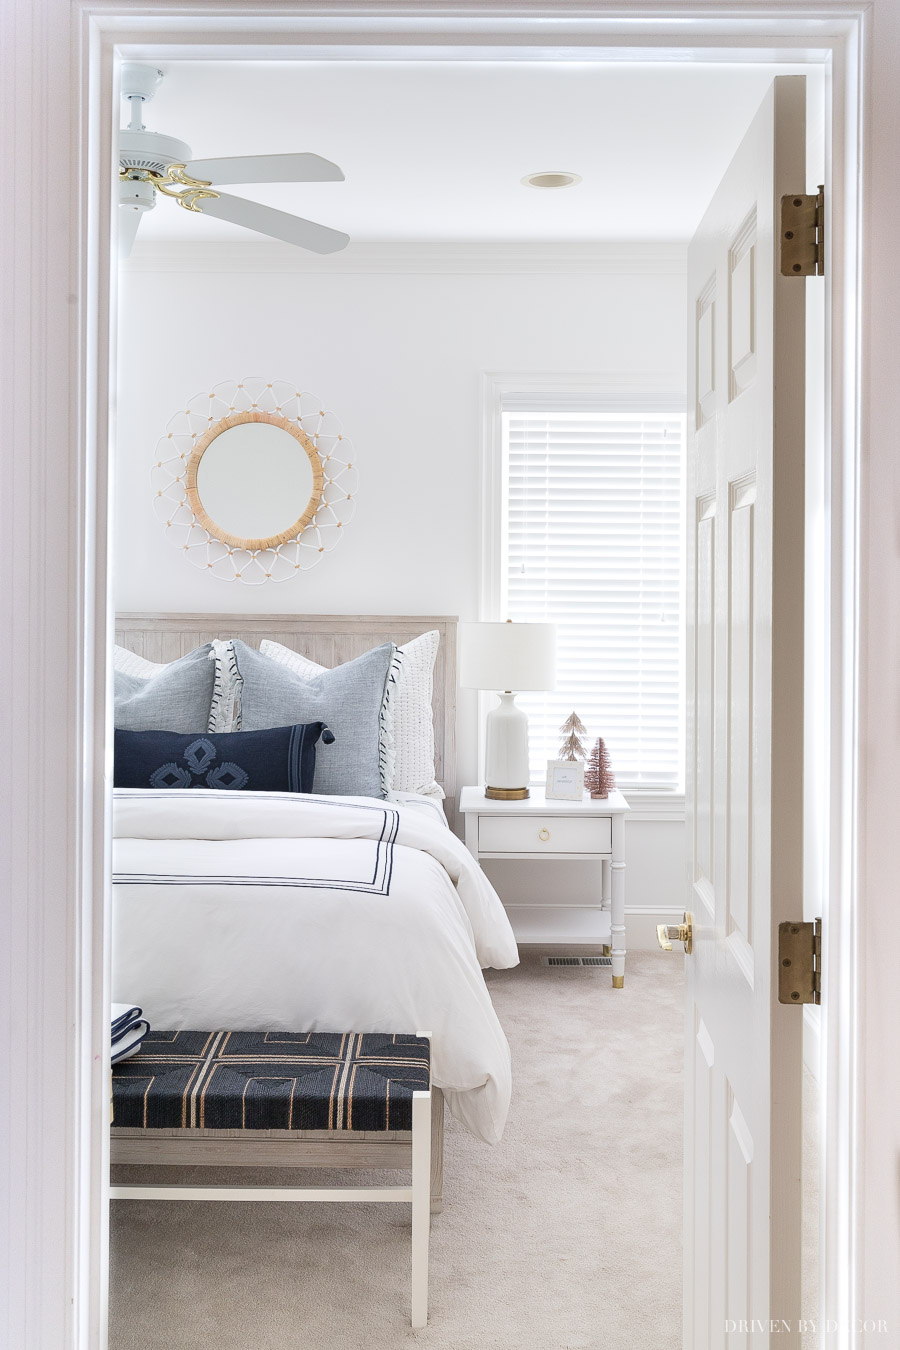 Come on in and let me show you around our newly made-over guest room!